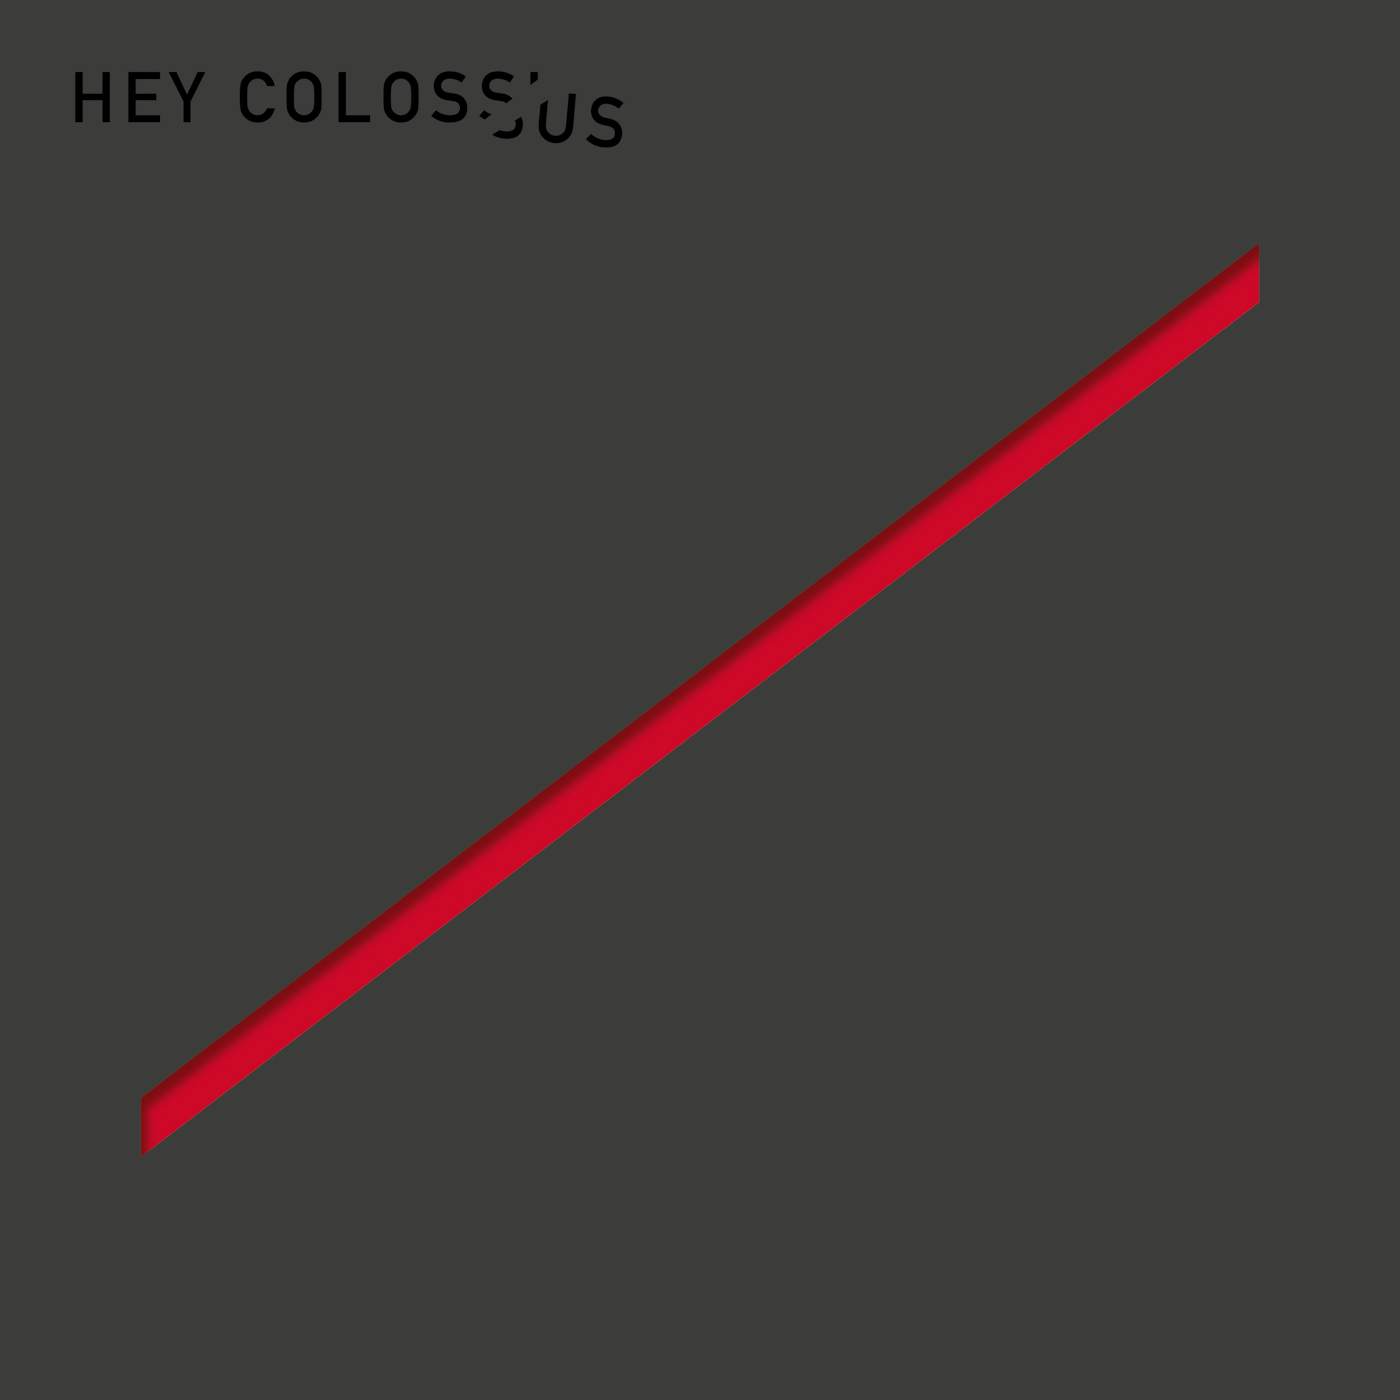 Hey Colossus 'The Guillotine' Vinyl Record